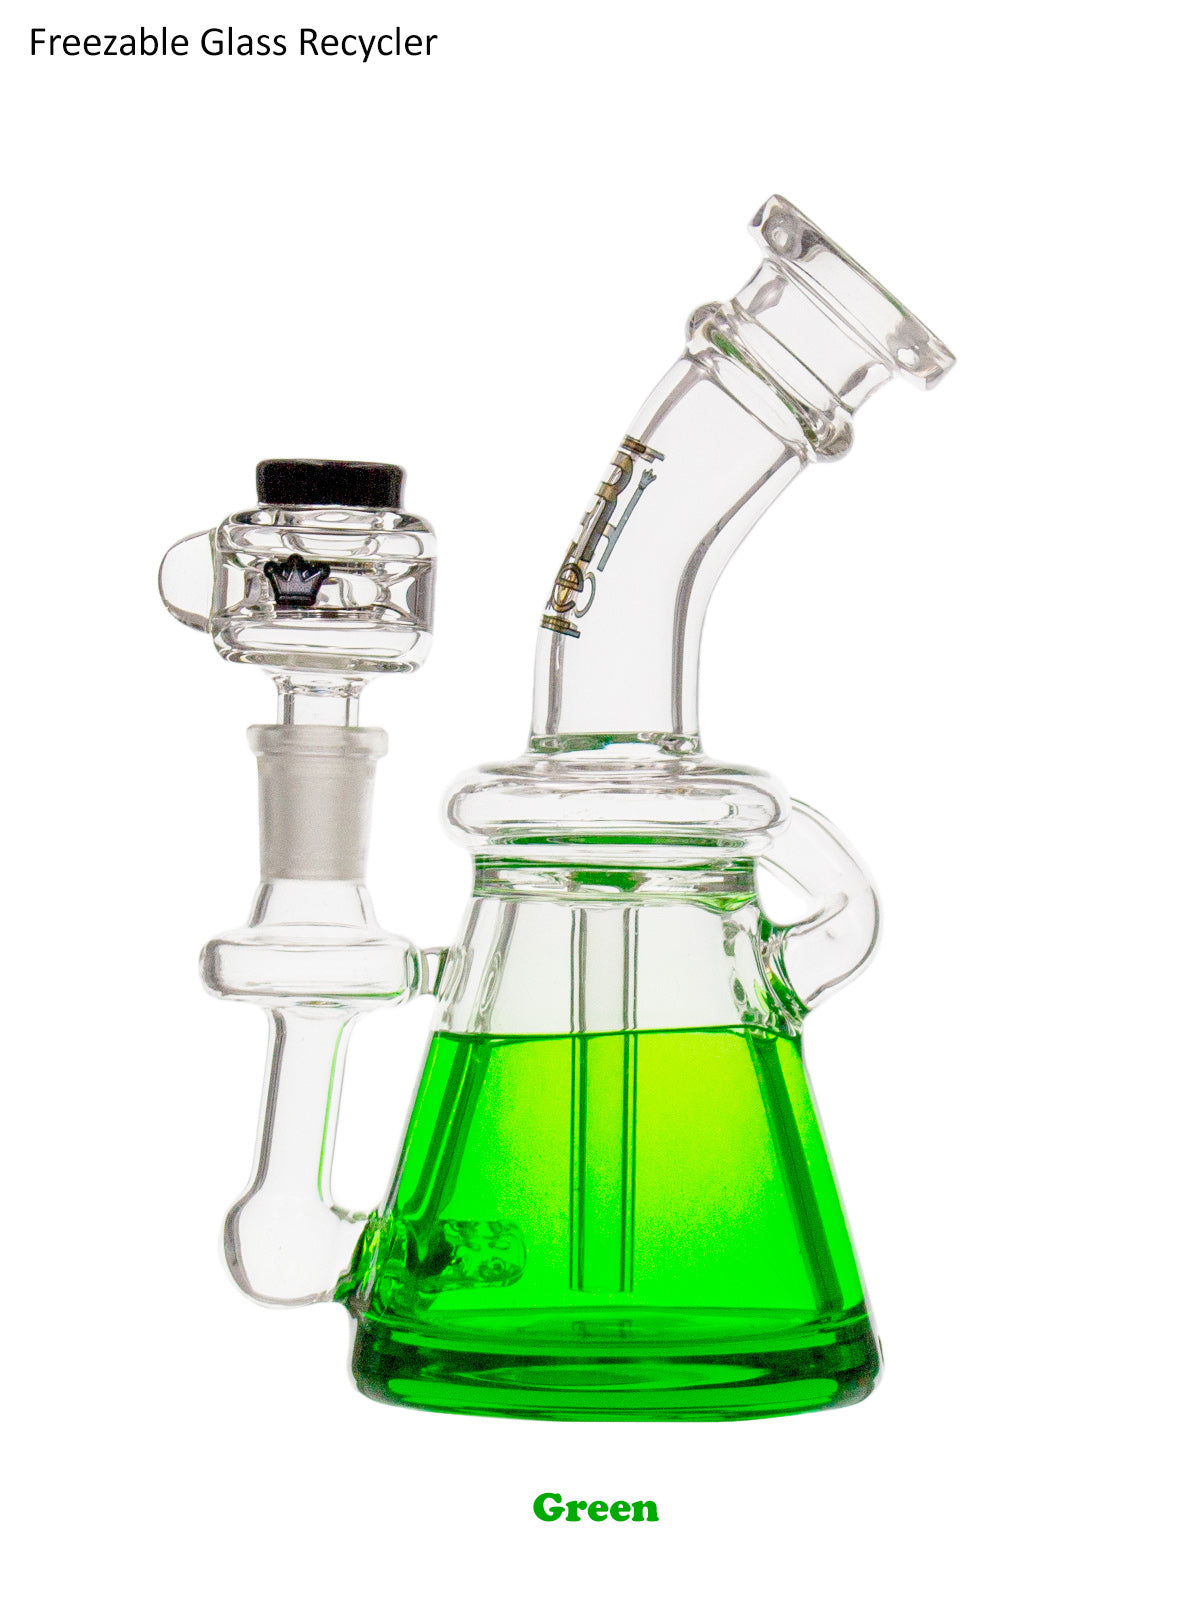 Krave Glass FreezeCYCLER BH * FREE GRINDER*